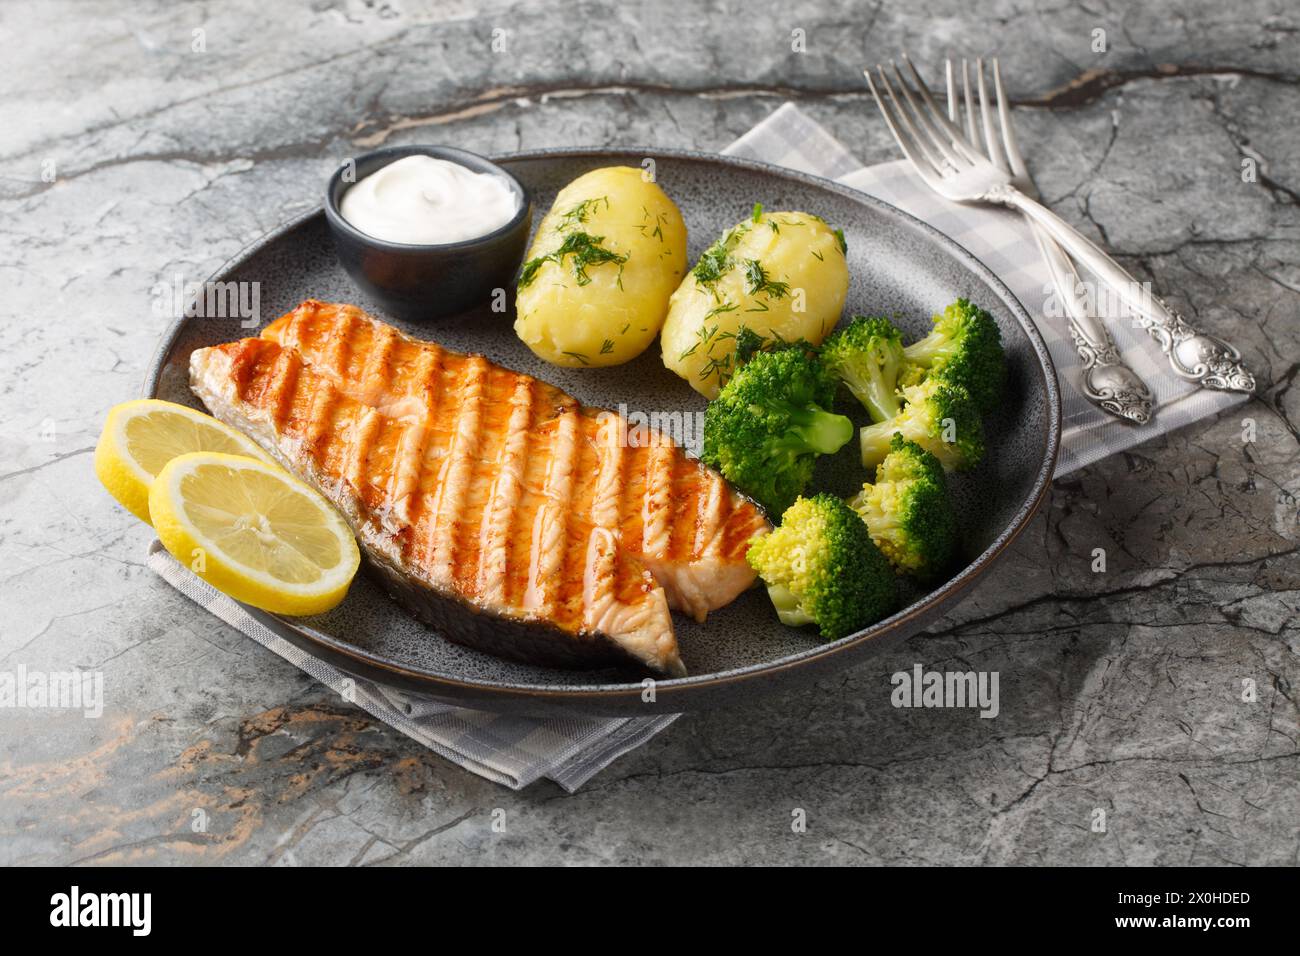 Grilled salmon, boiled potatoes, broccoli and cream sauce in a plate on the table. Horizontal Stock Photo